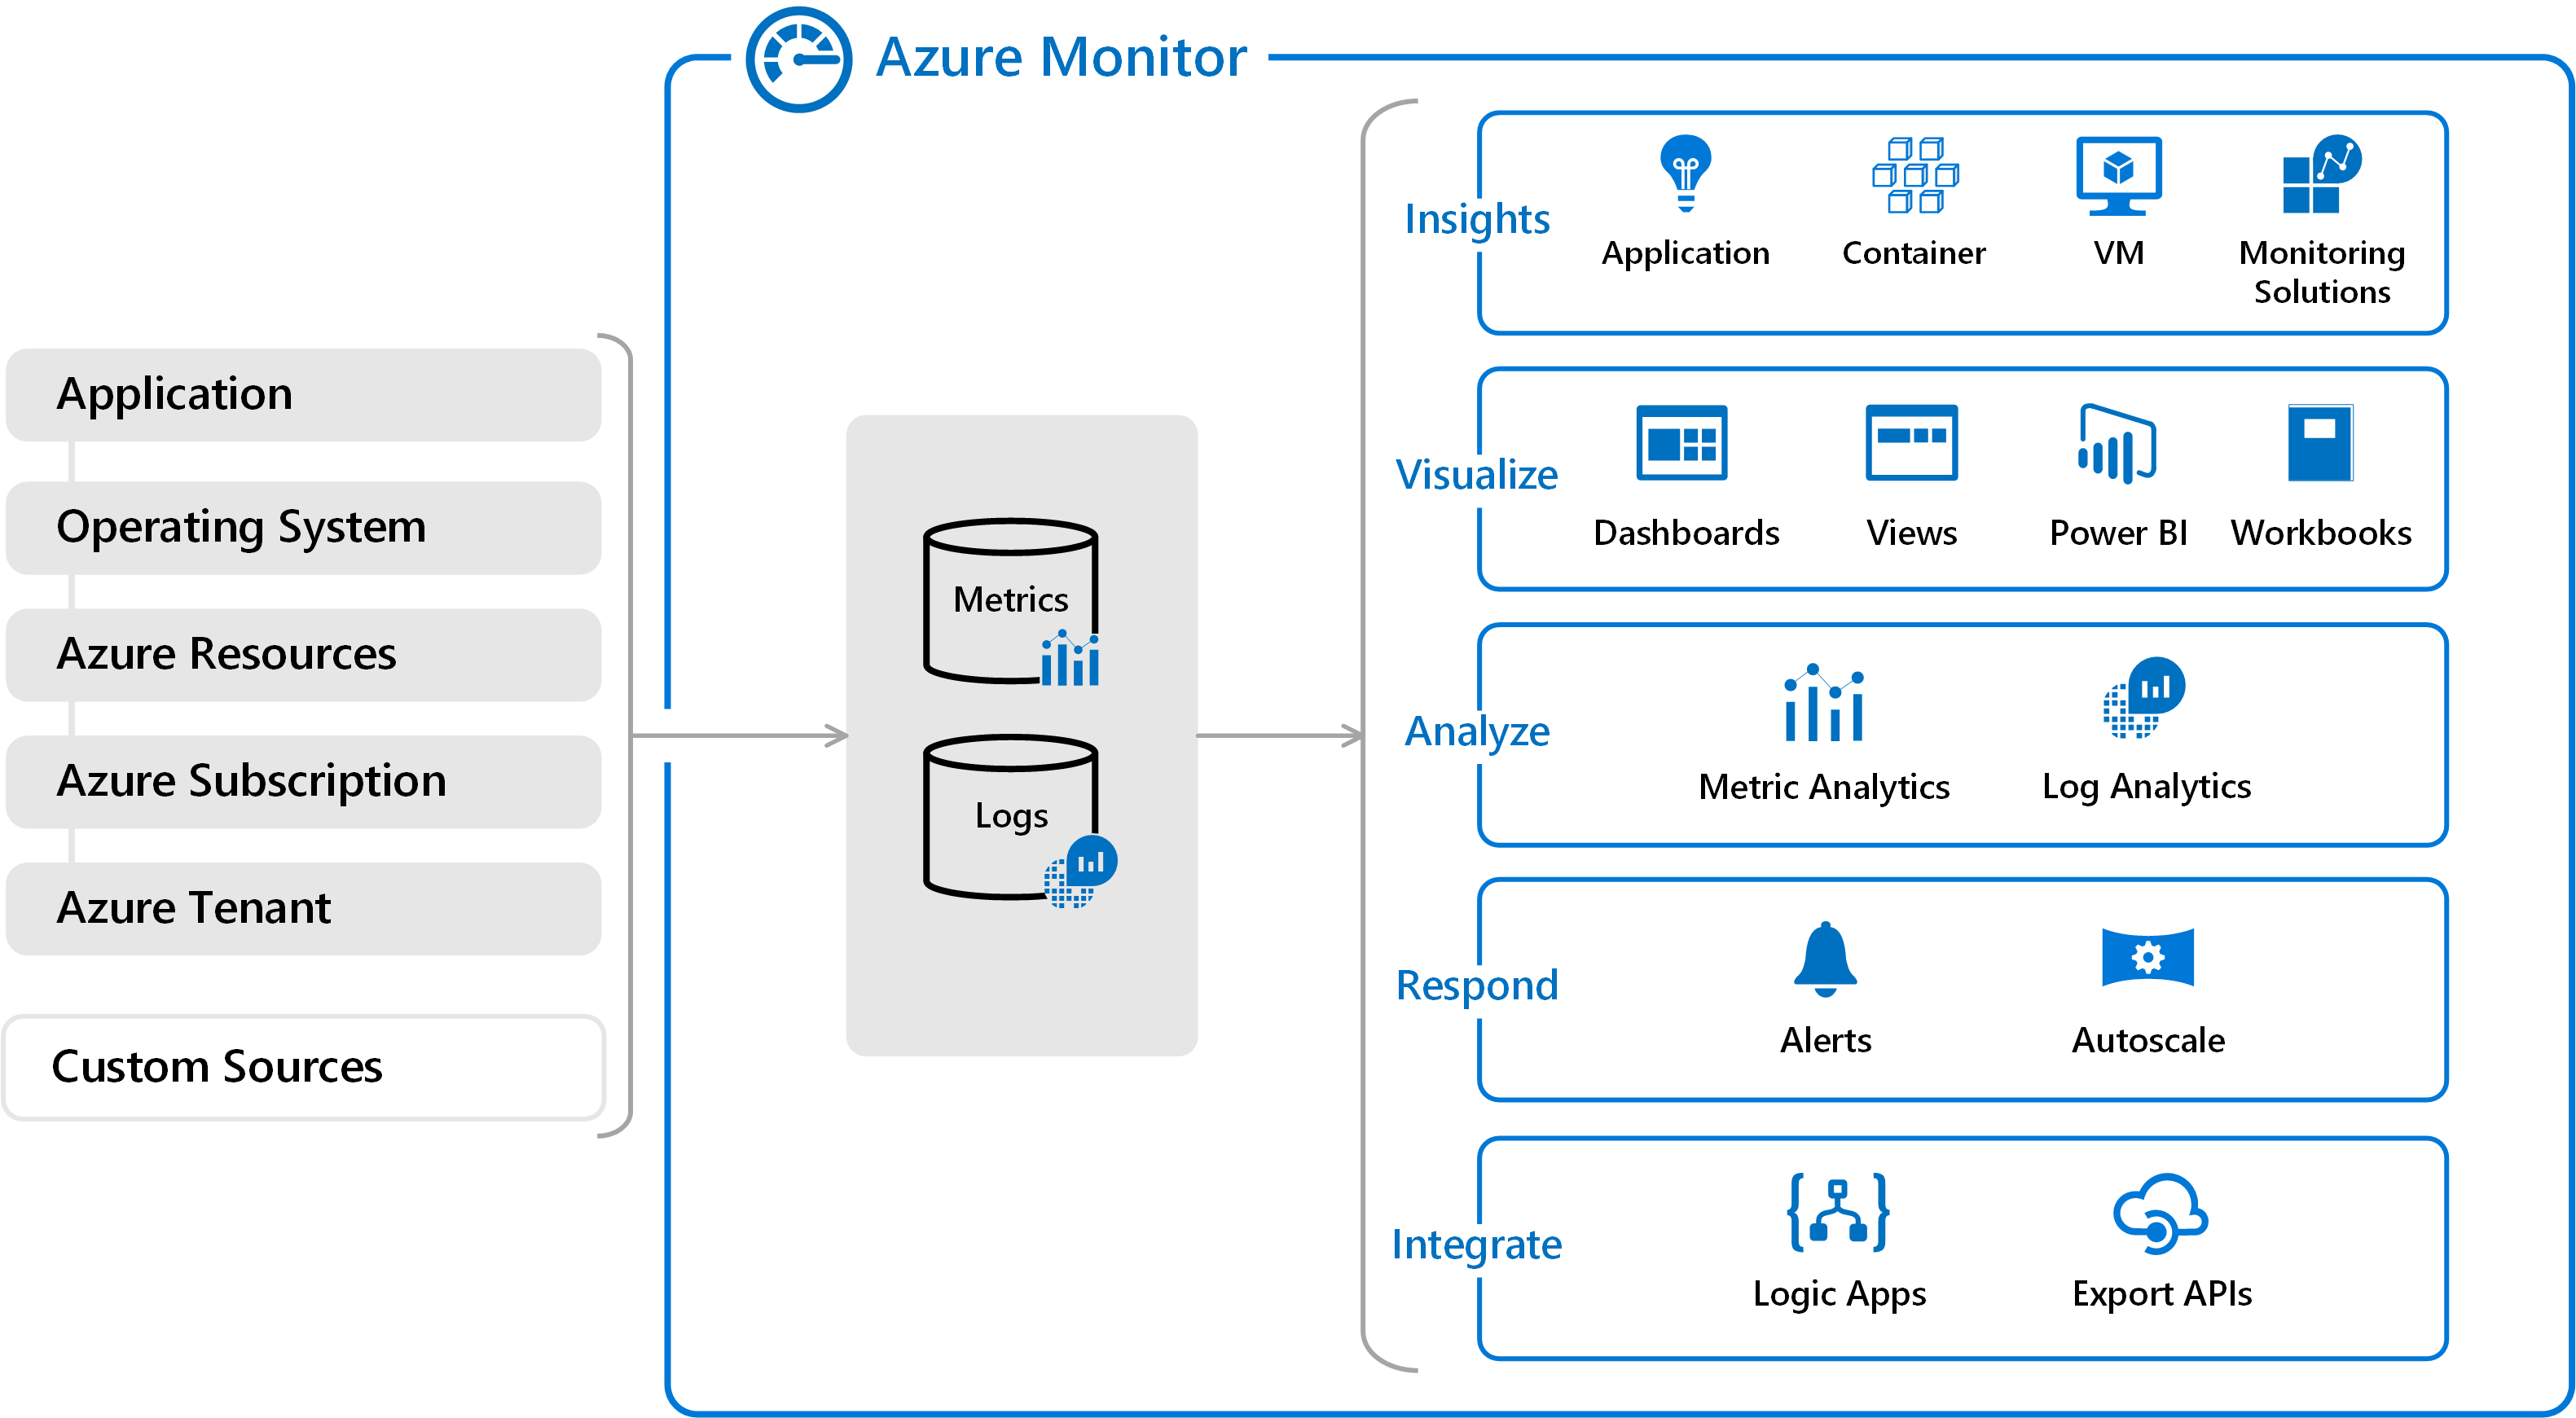 Diagram of the relationship between logging and metric data sources, and how that data is consumed in Azure Monitor.